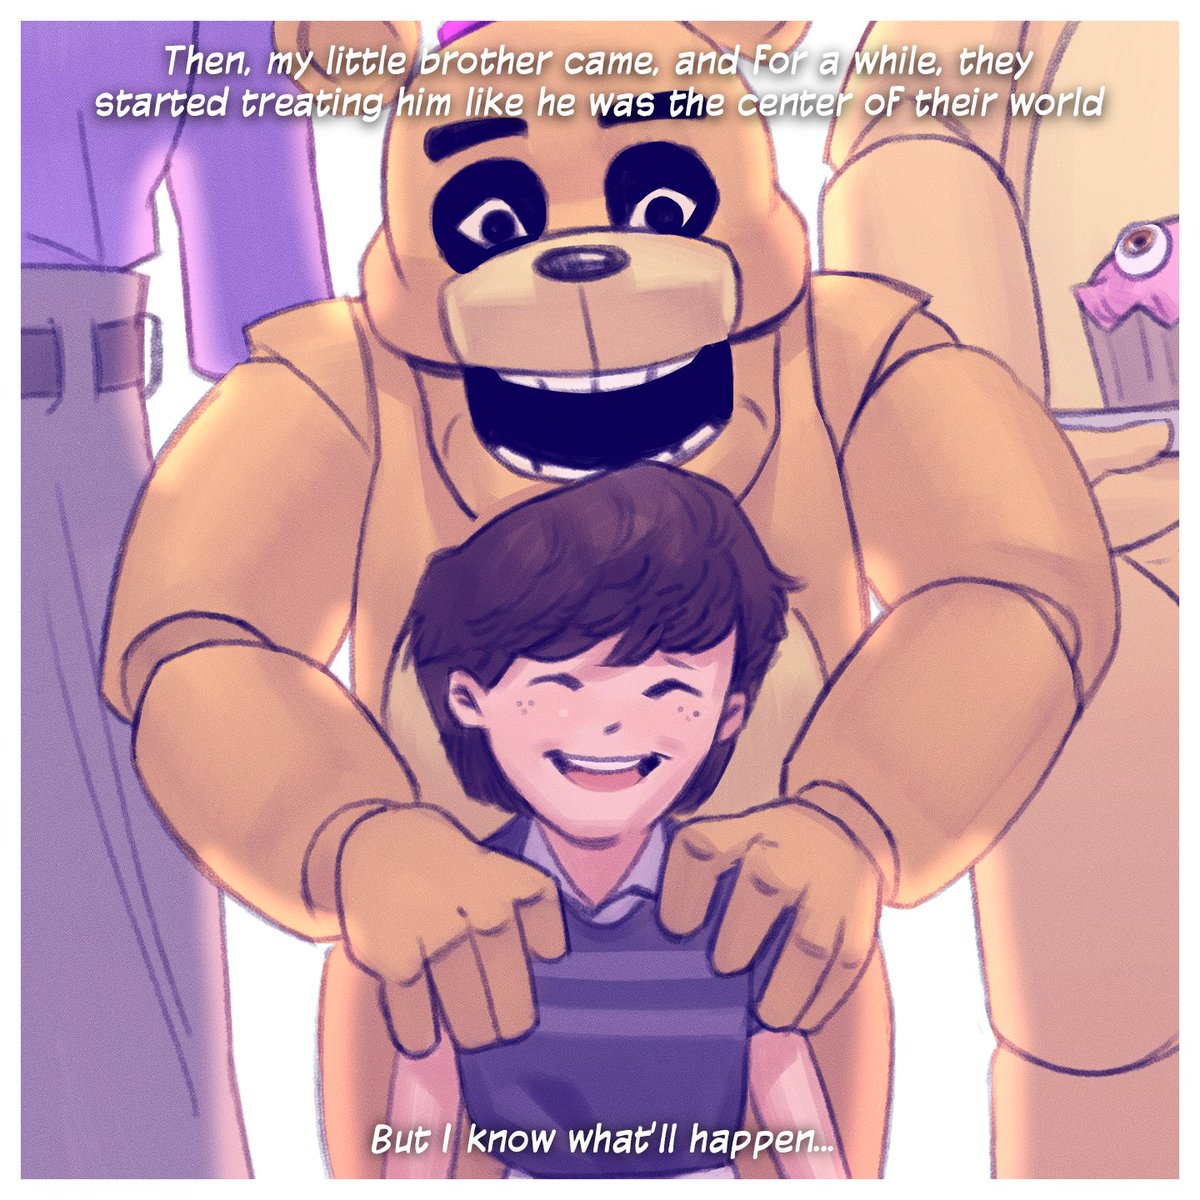 #fnaf to be have been loved is...